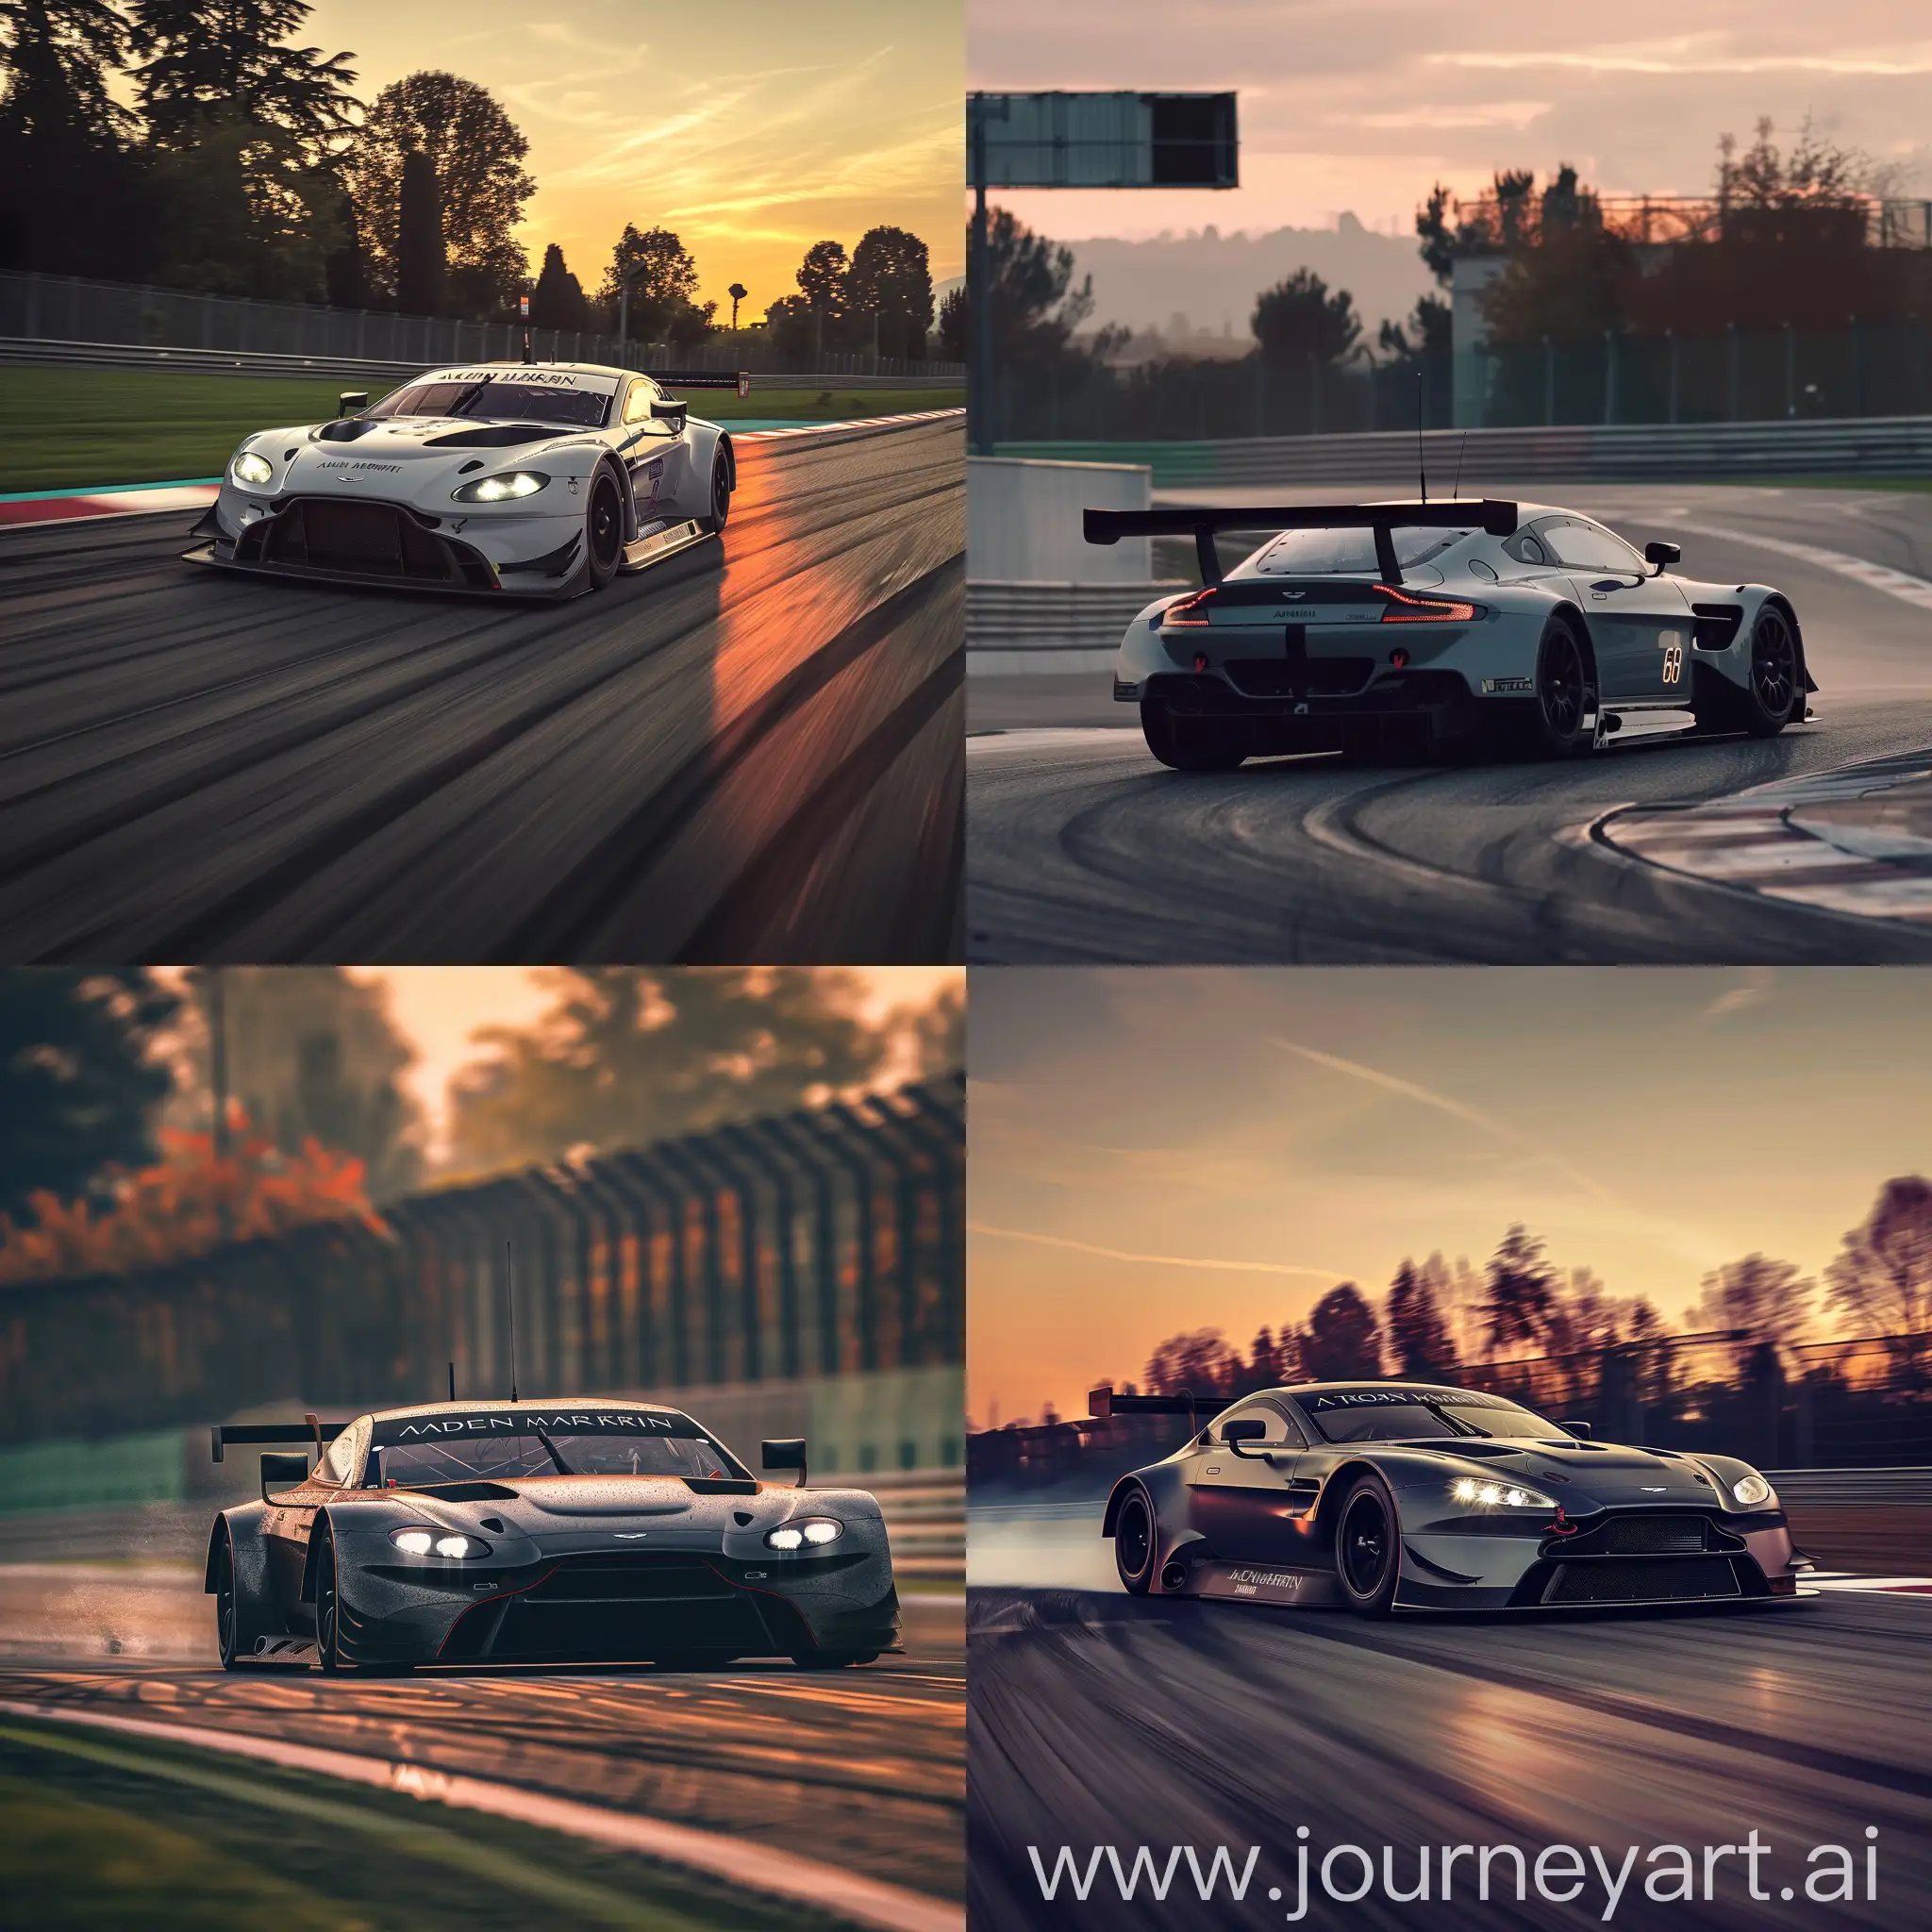 Youtube preview, hd, aston martin vantage v8 gt3 on race track monza, ditailed, blury background